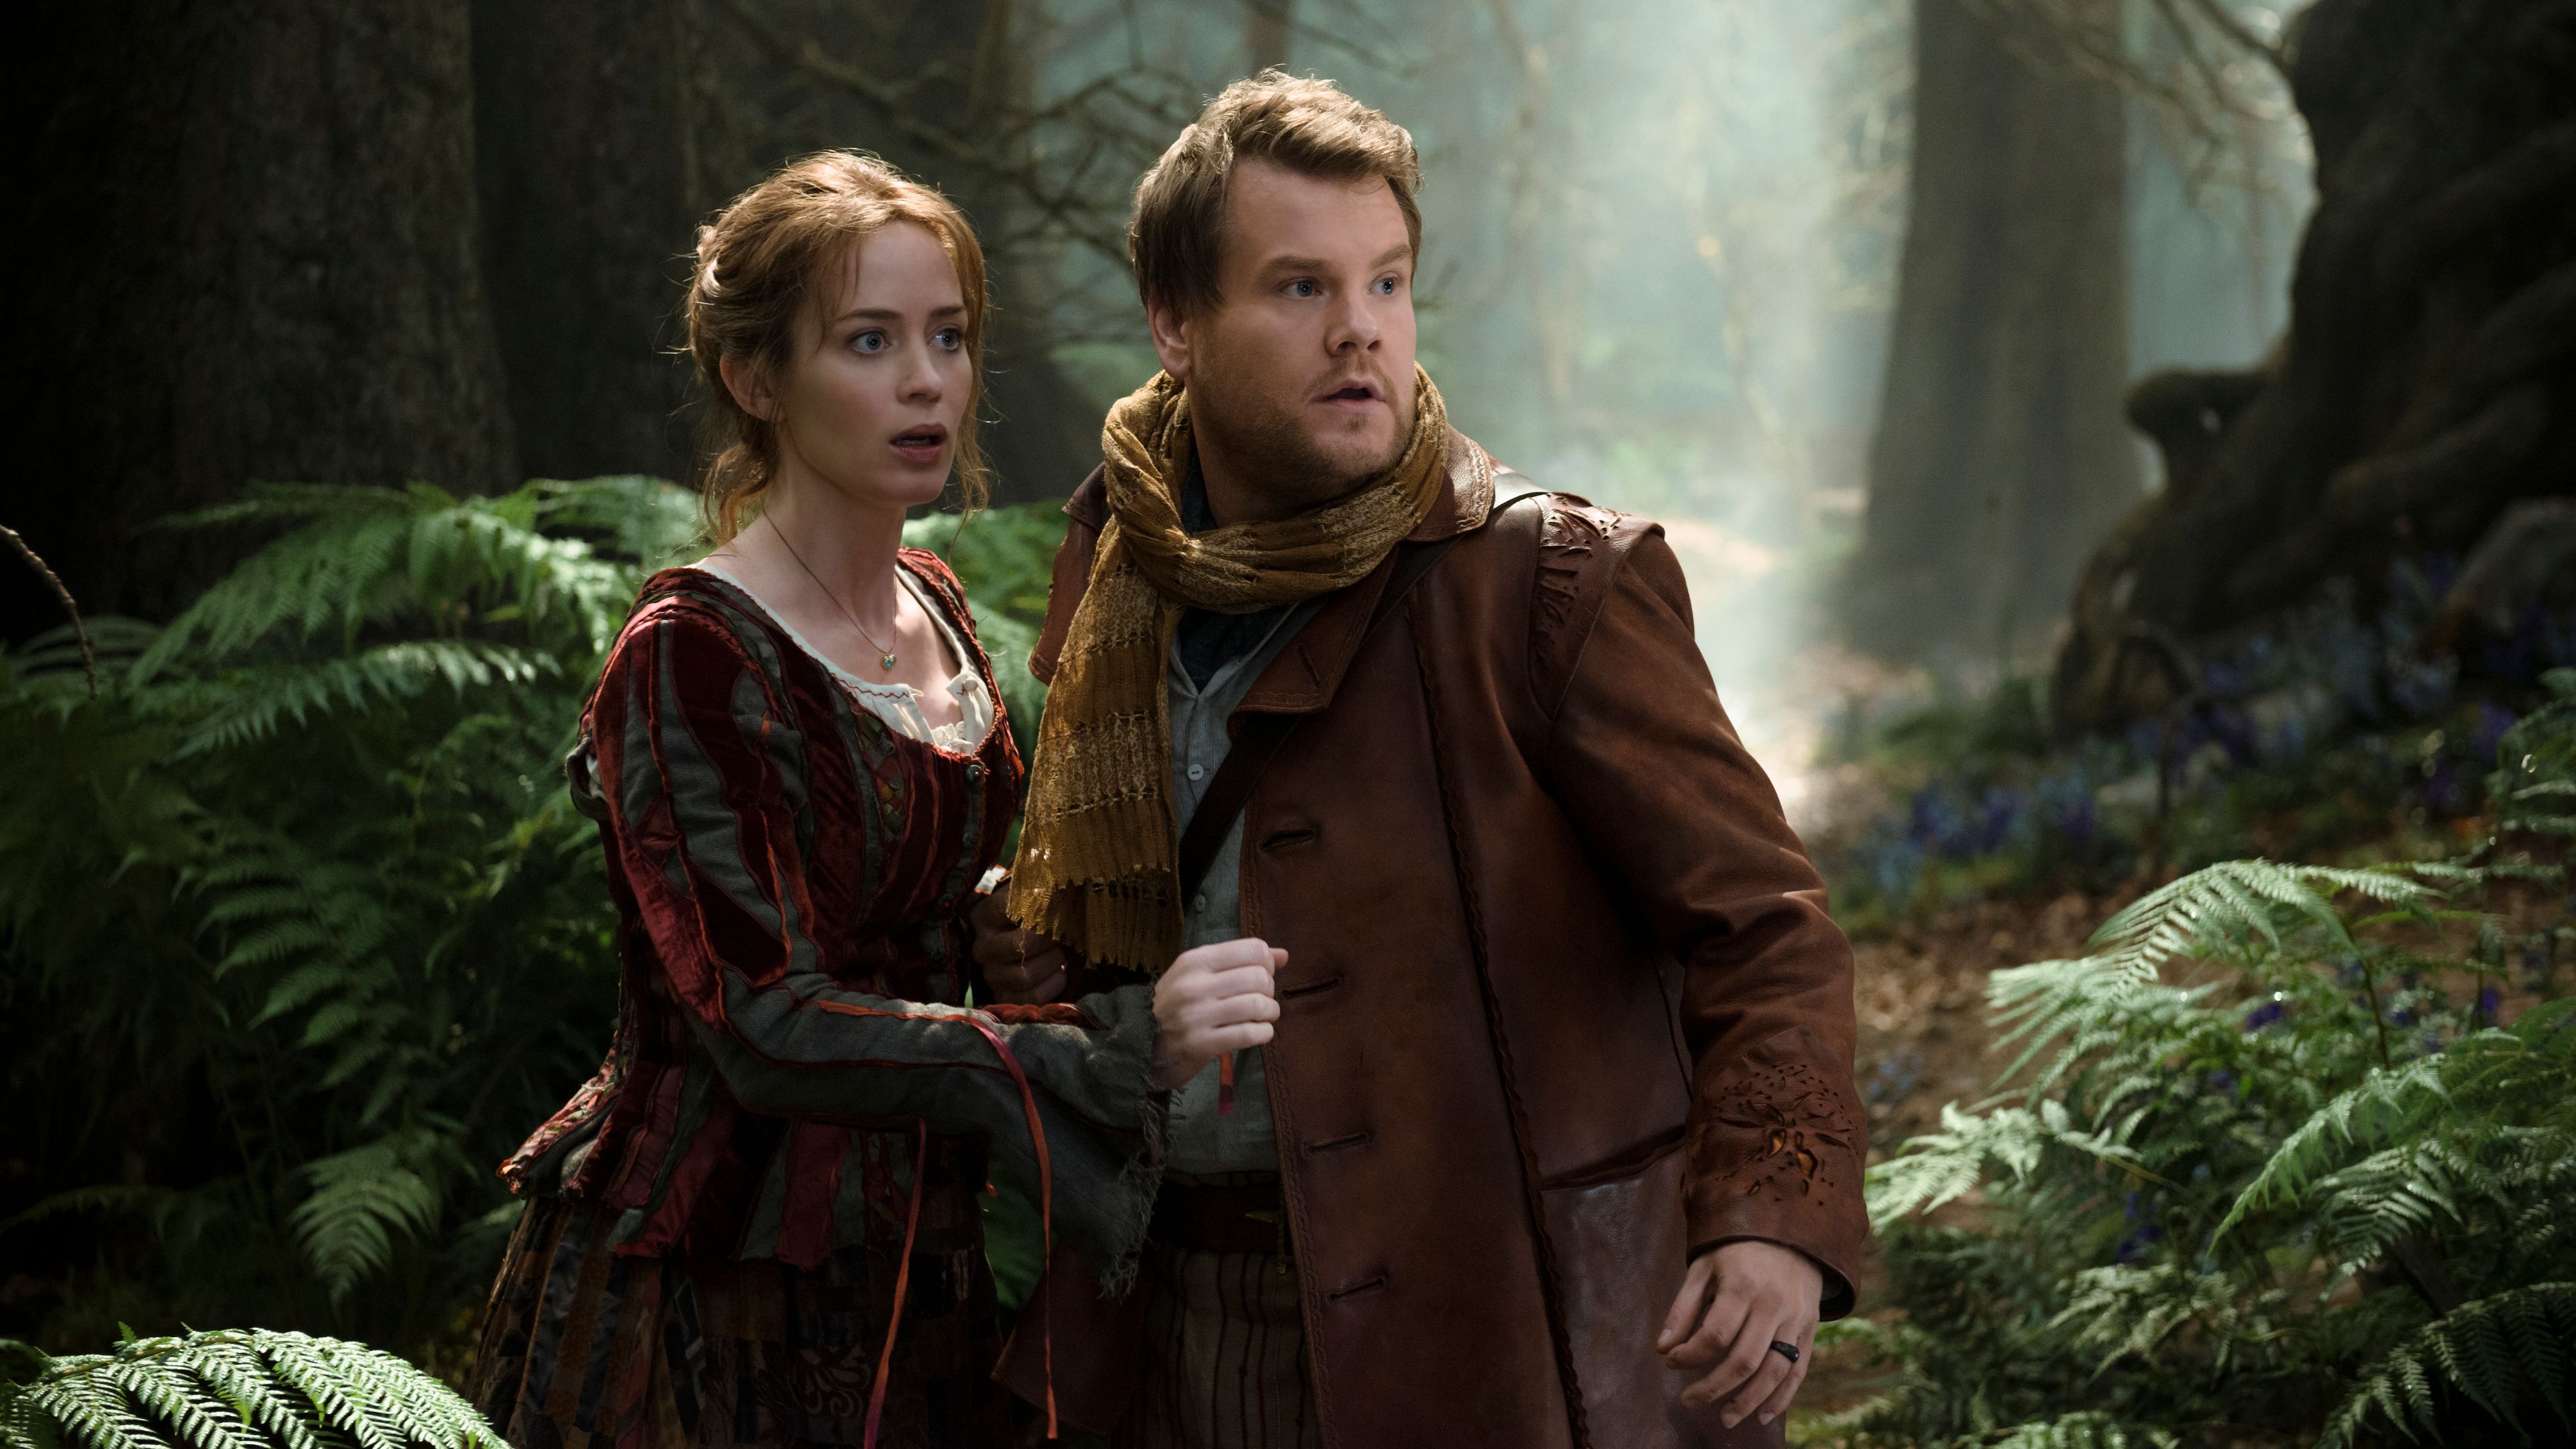 movie, into the woods (2014), disney, into the woods